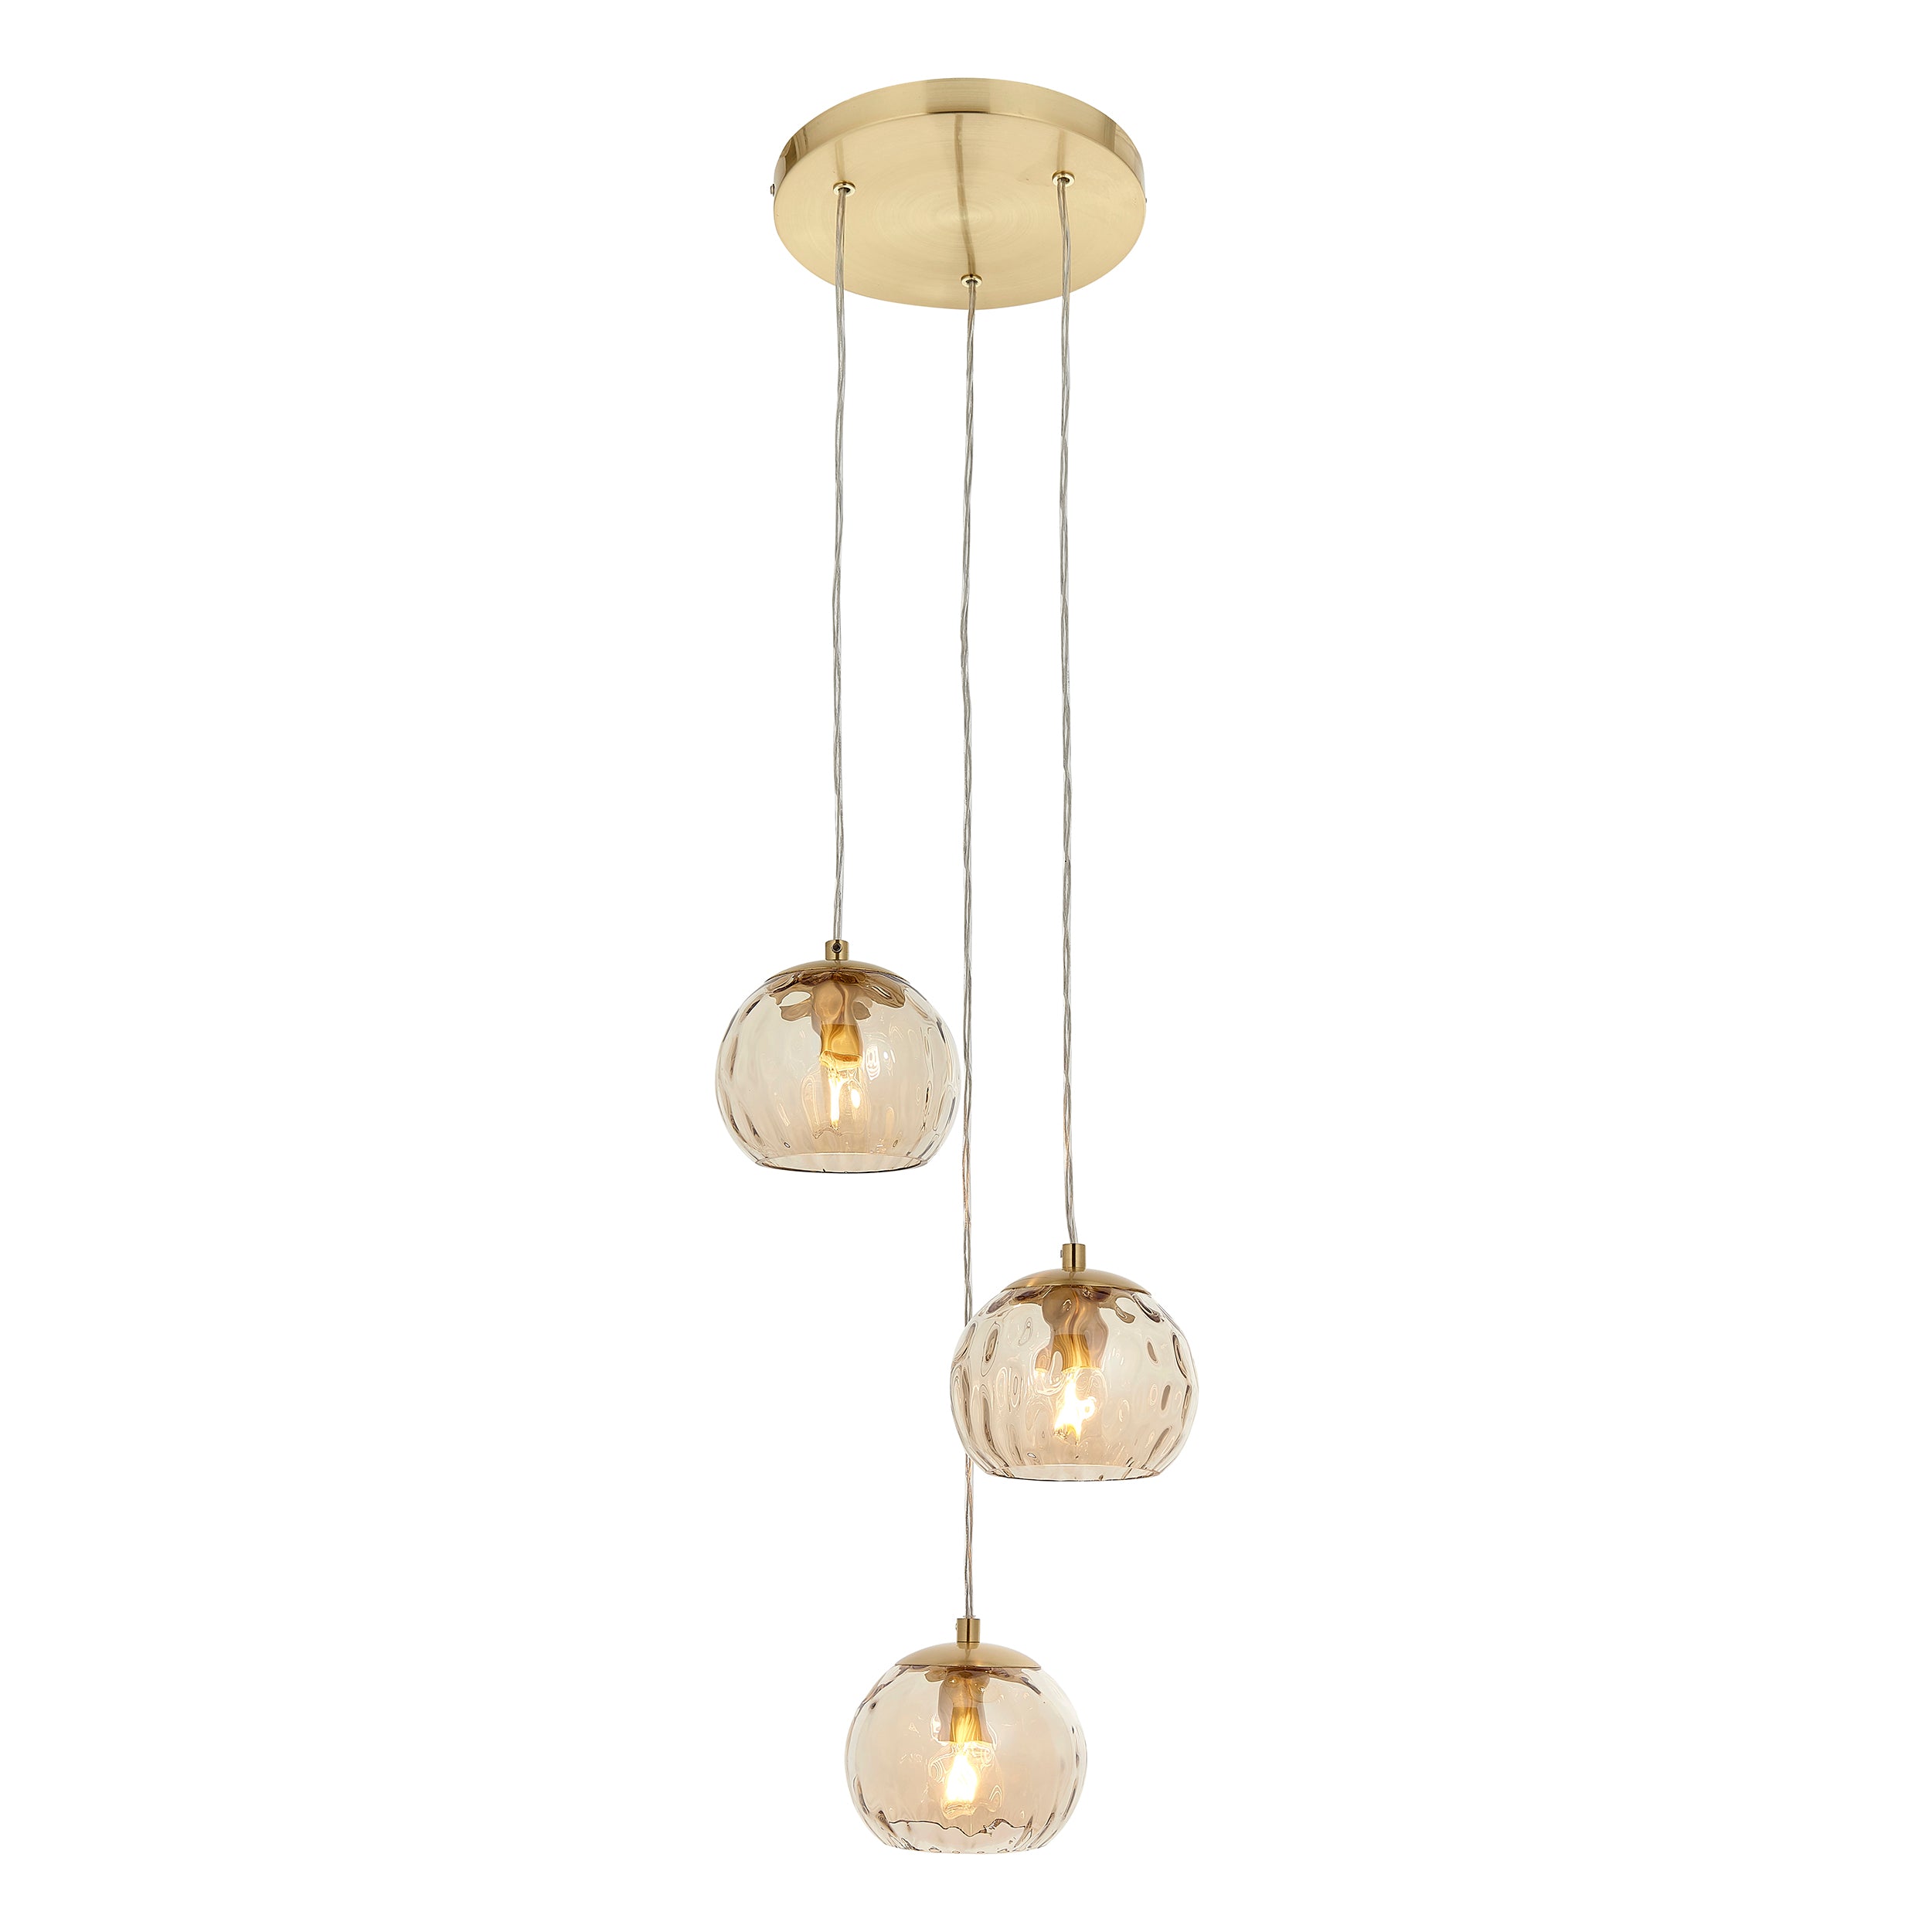 Dimple 3 Light Pendant. Brushed Gold With Champagne Shades